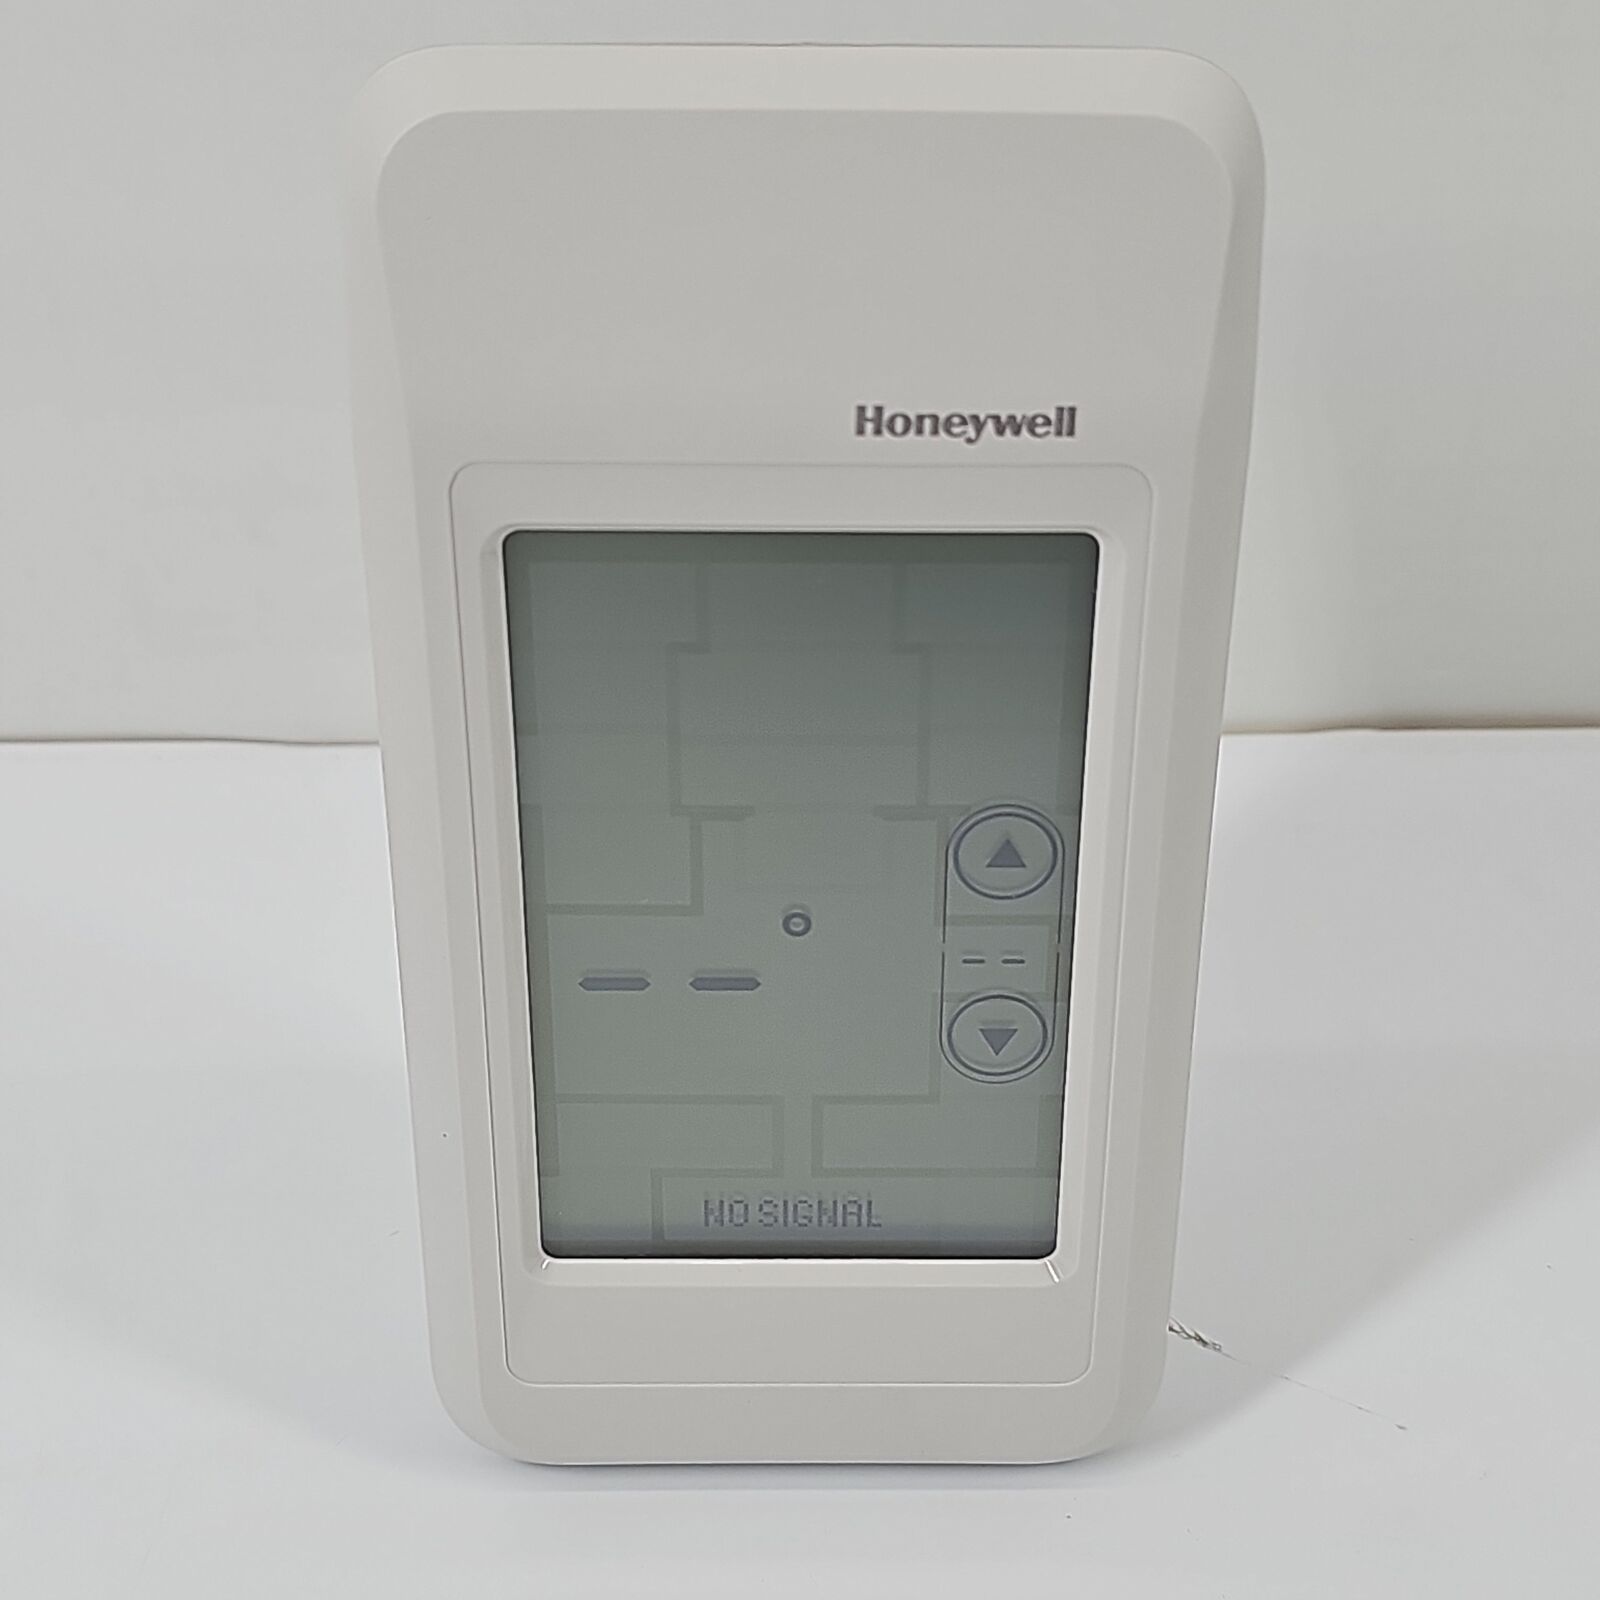 Honeywell Portable Comfort Control Programmable Thermostat White REM5000R1001